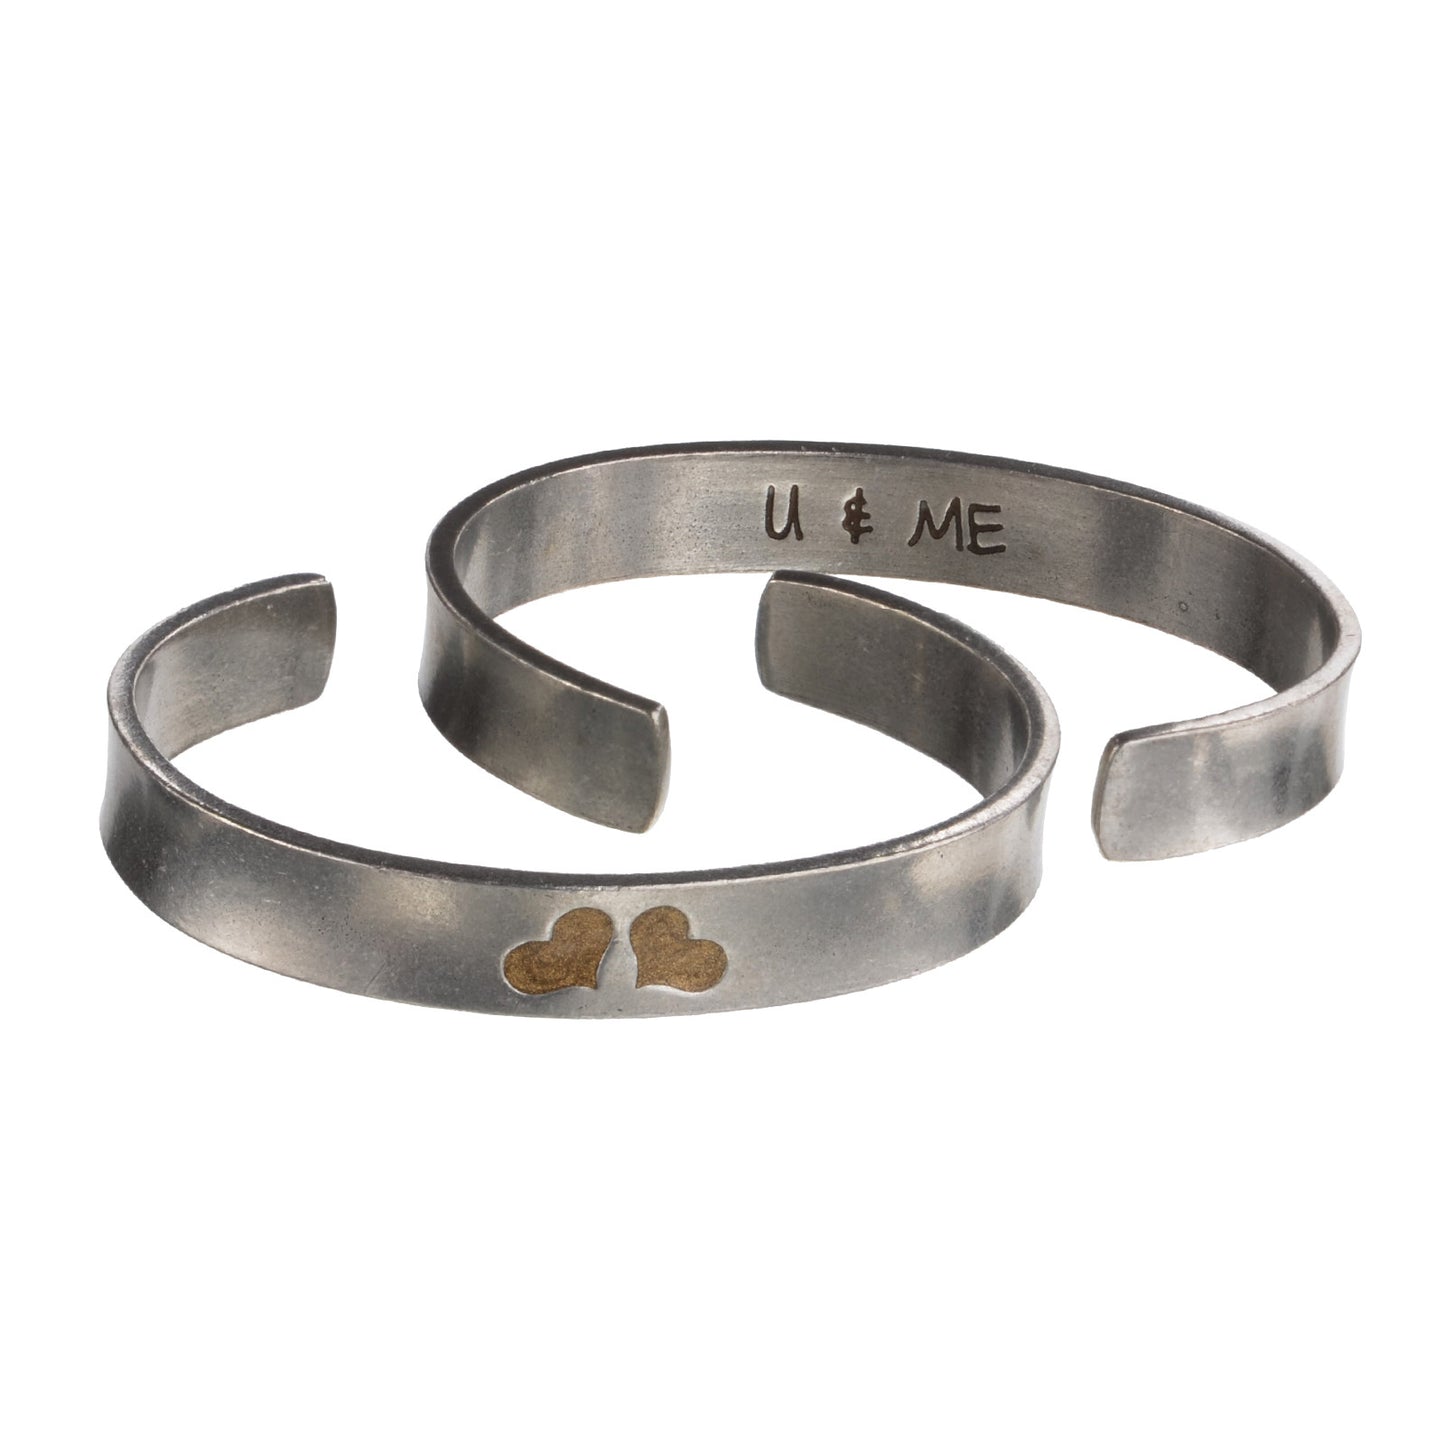 U & Me Quotable Cuff Bracelet front and back